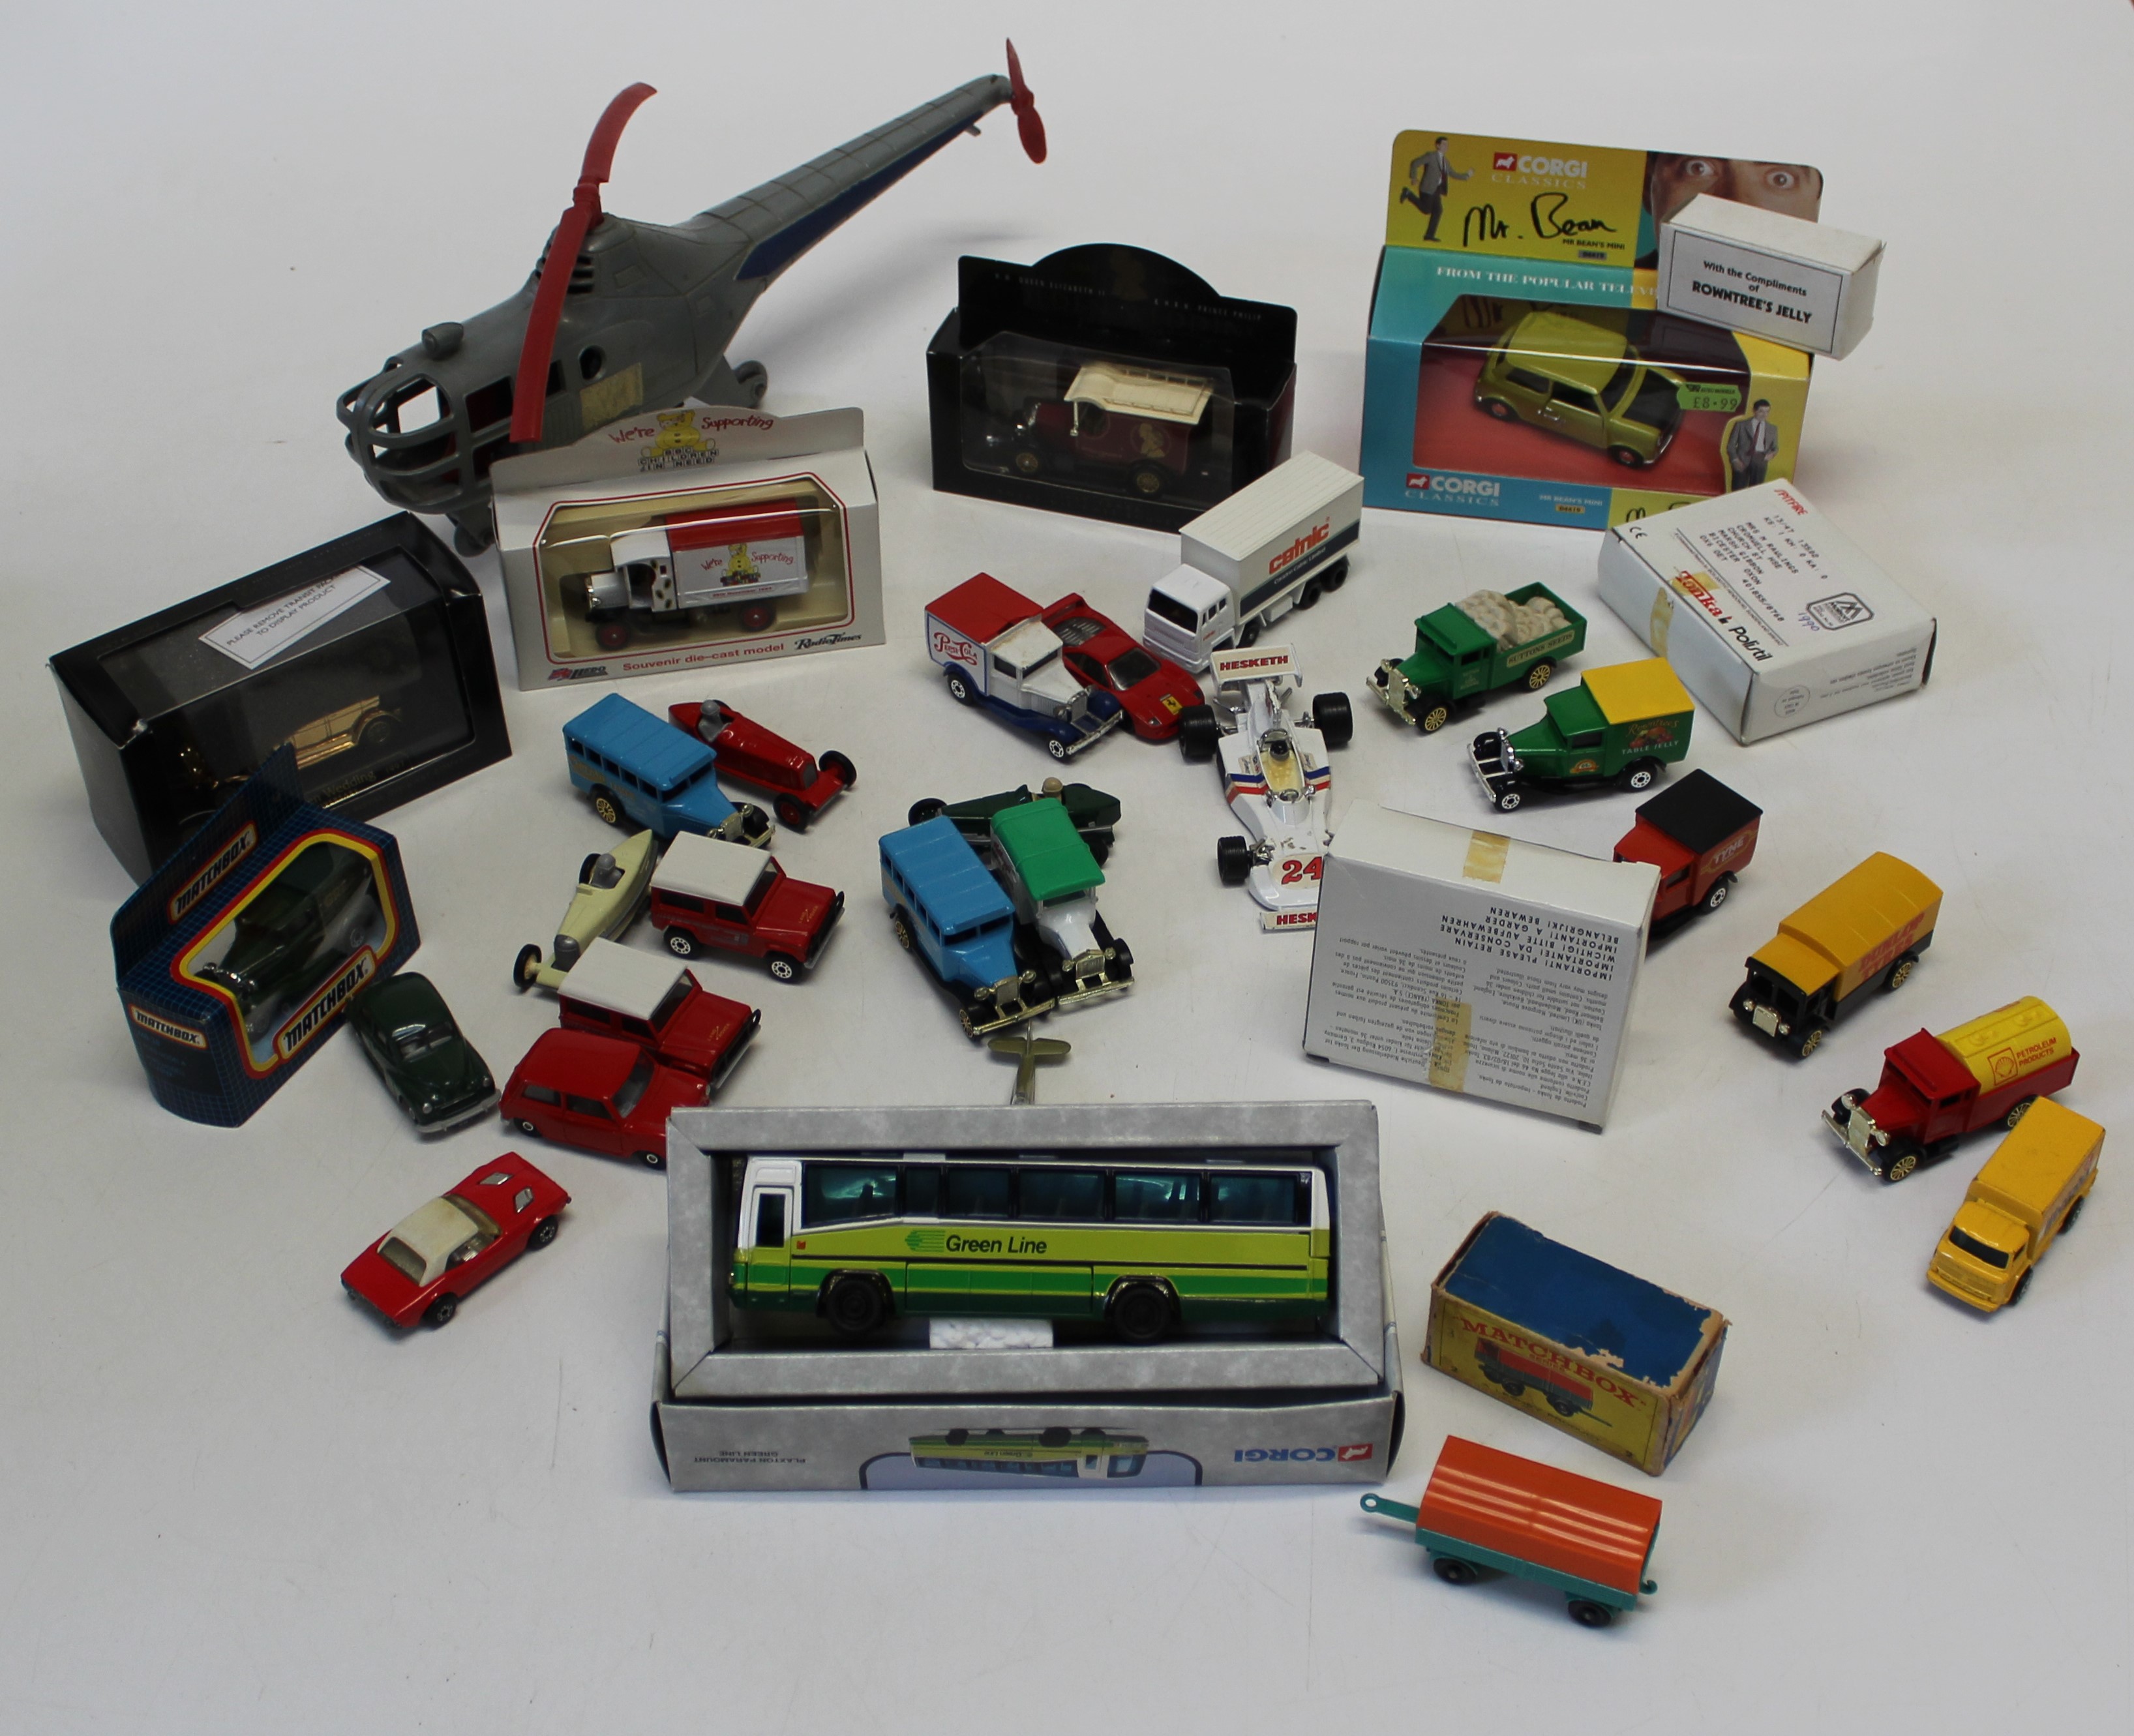 A small collection of Matchbox, Lledo and Corgi vehicles, including a limited edition Corgi Green